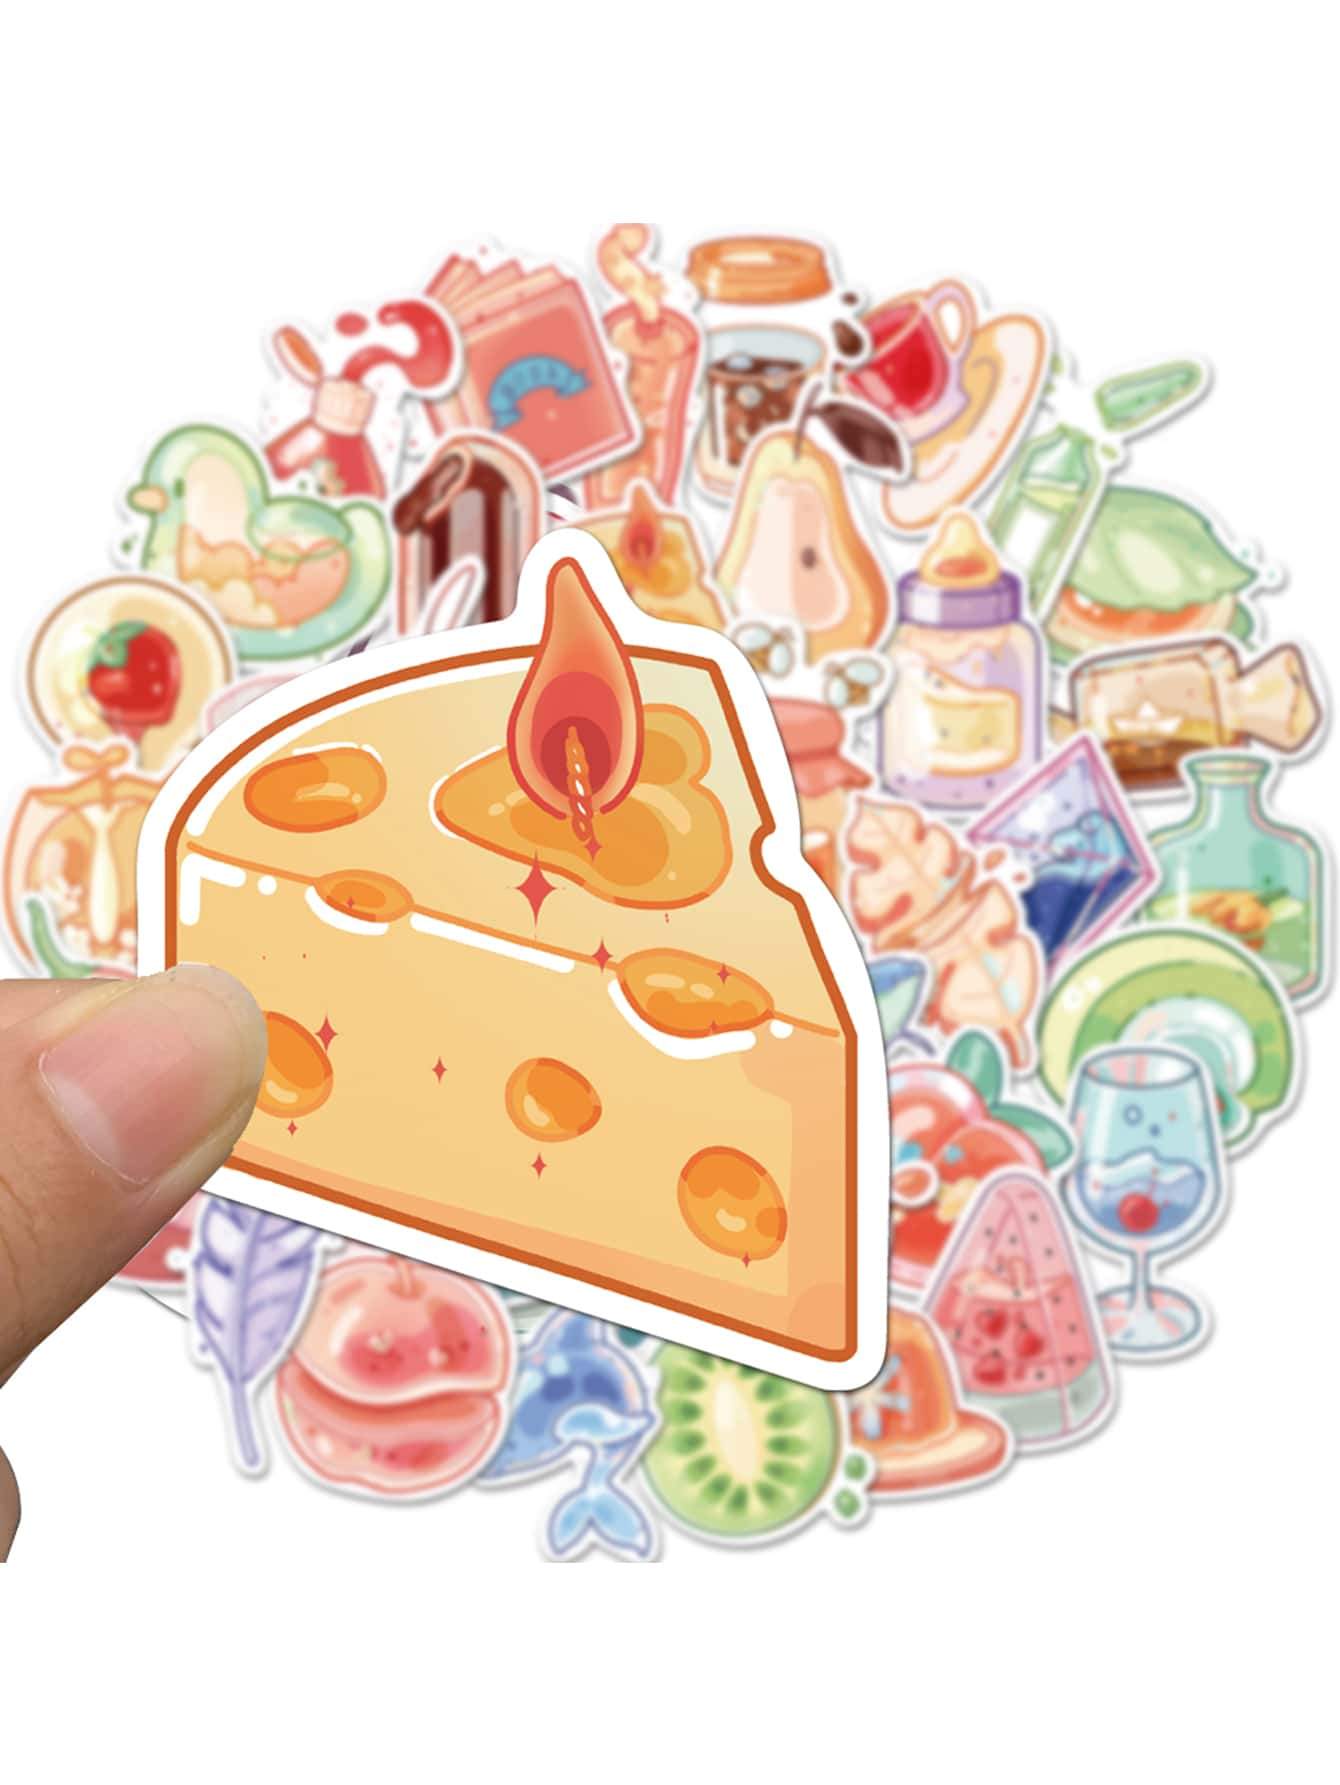 The Indie Food Stickers is a simple and interesting sticker